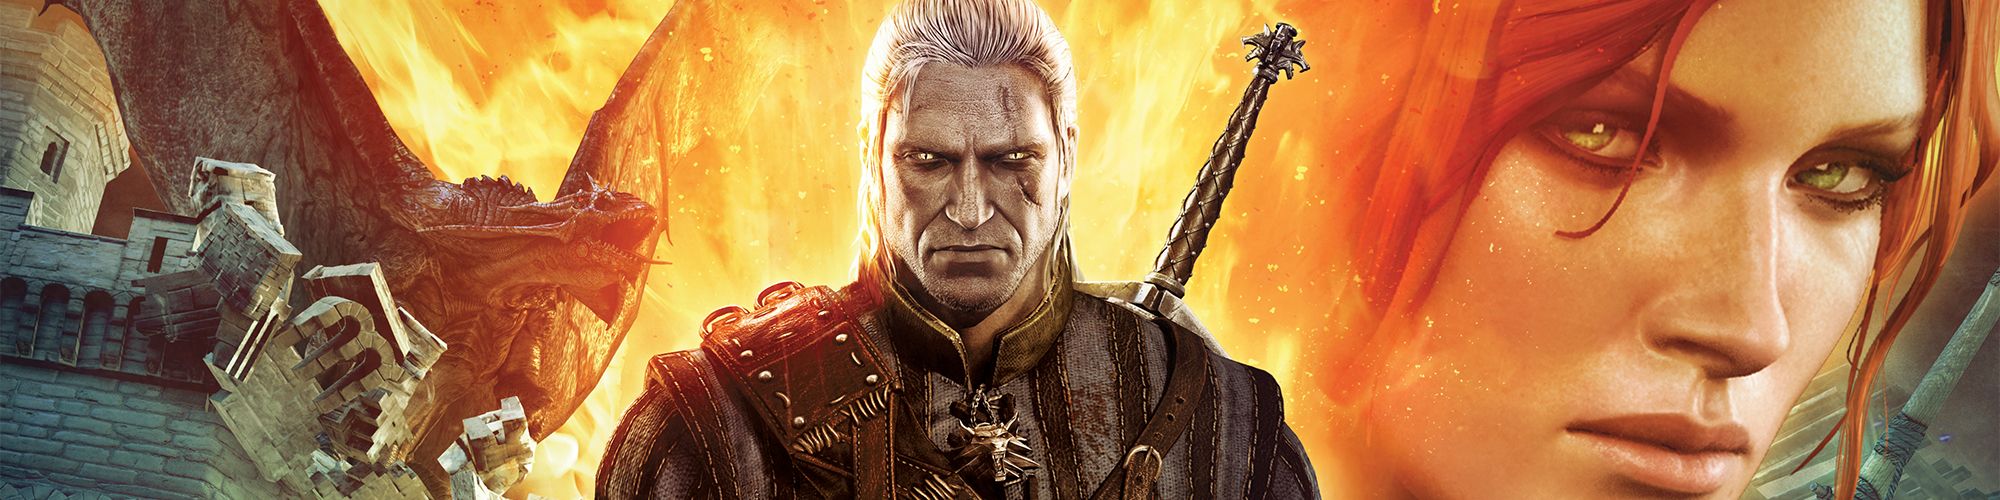 The Witcher 2: Assassins of Kings Enhanced Edition technical specifications for computer